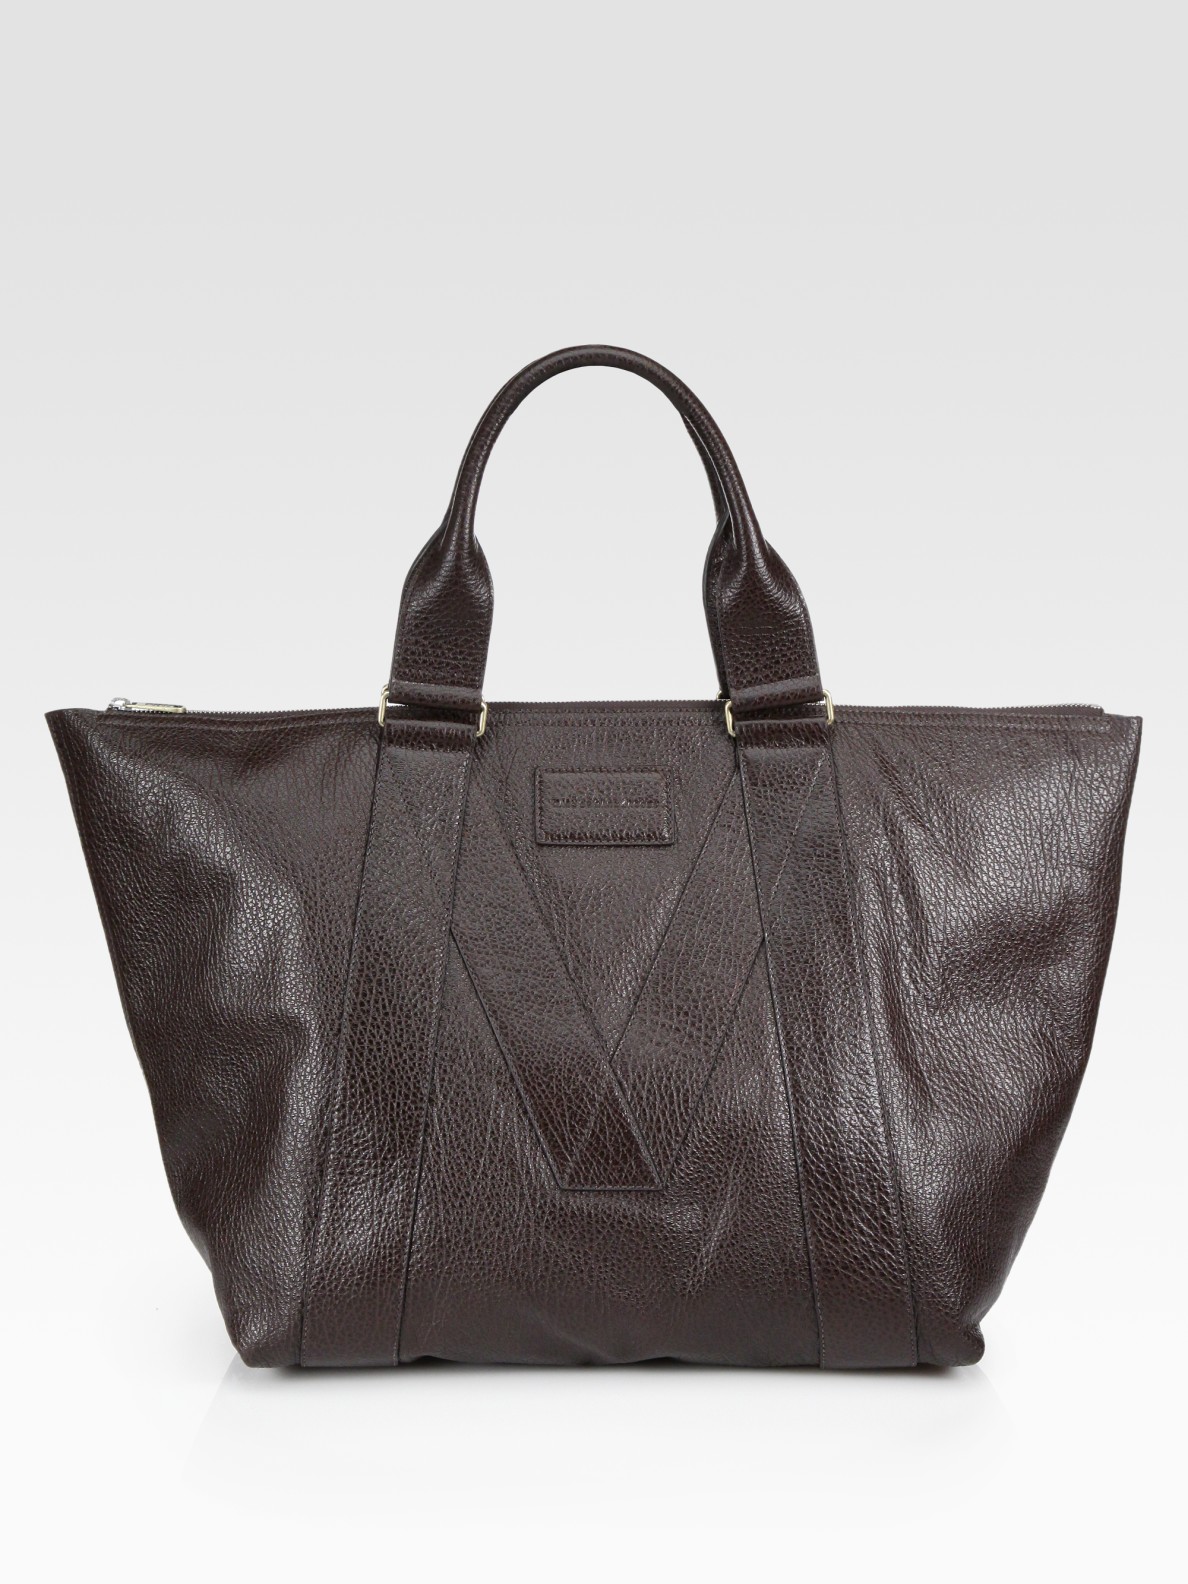 Marc By Marc Jacobs M Standard Supply Leather Tote Bag in Chocolate (Brown) for Men - Lyst